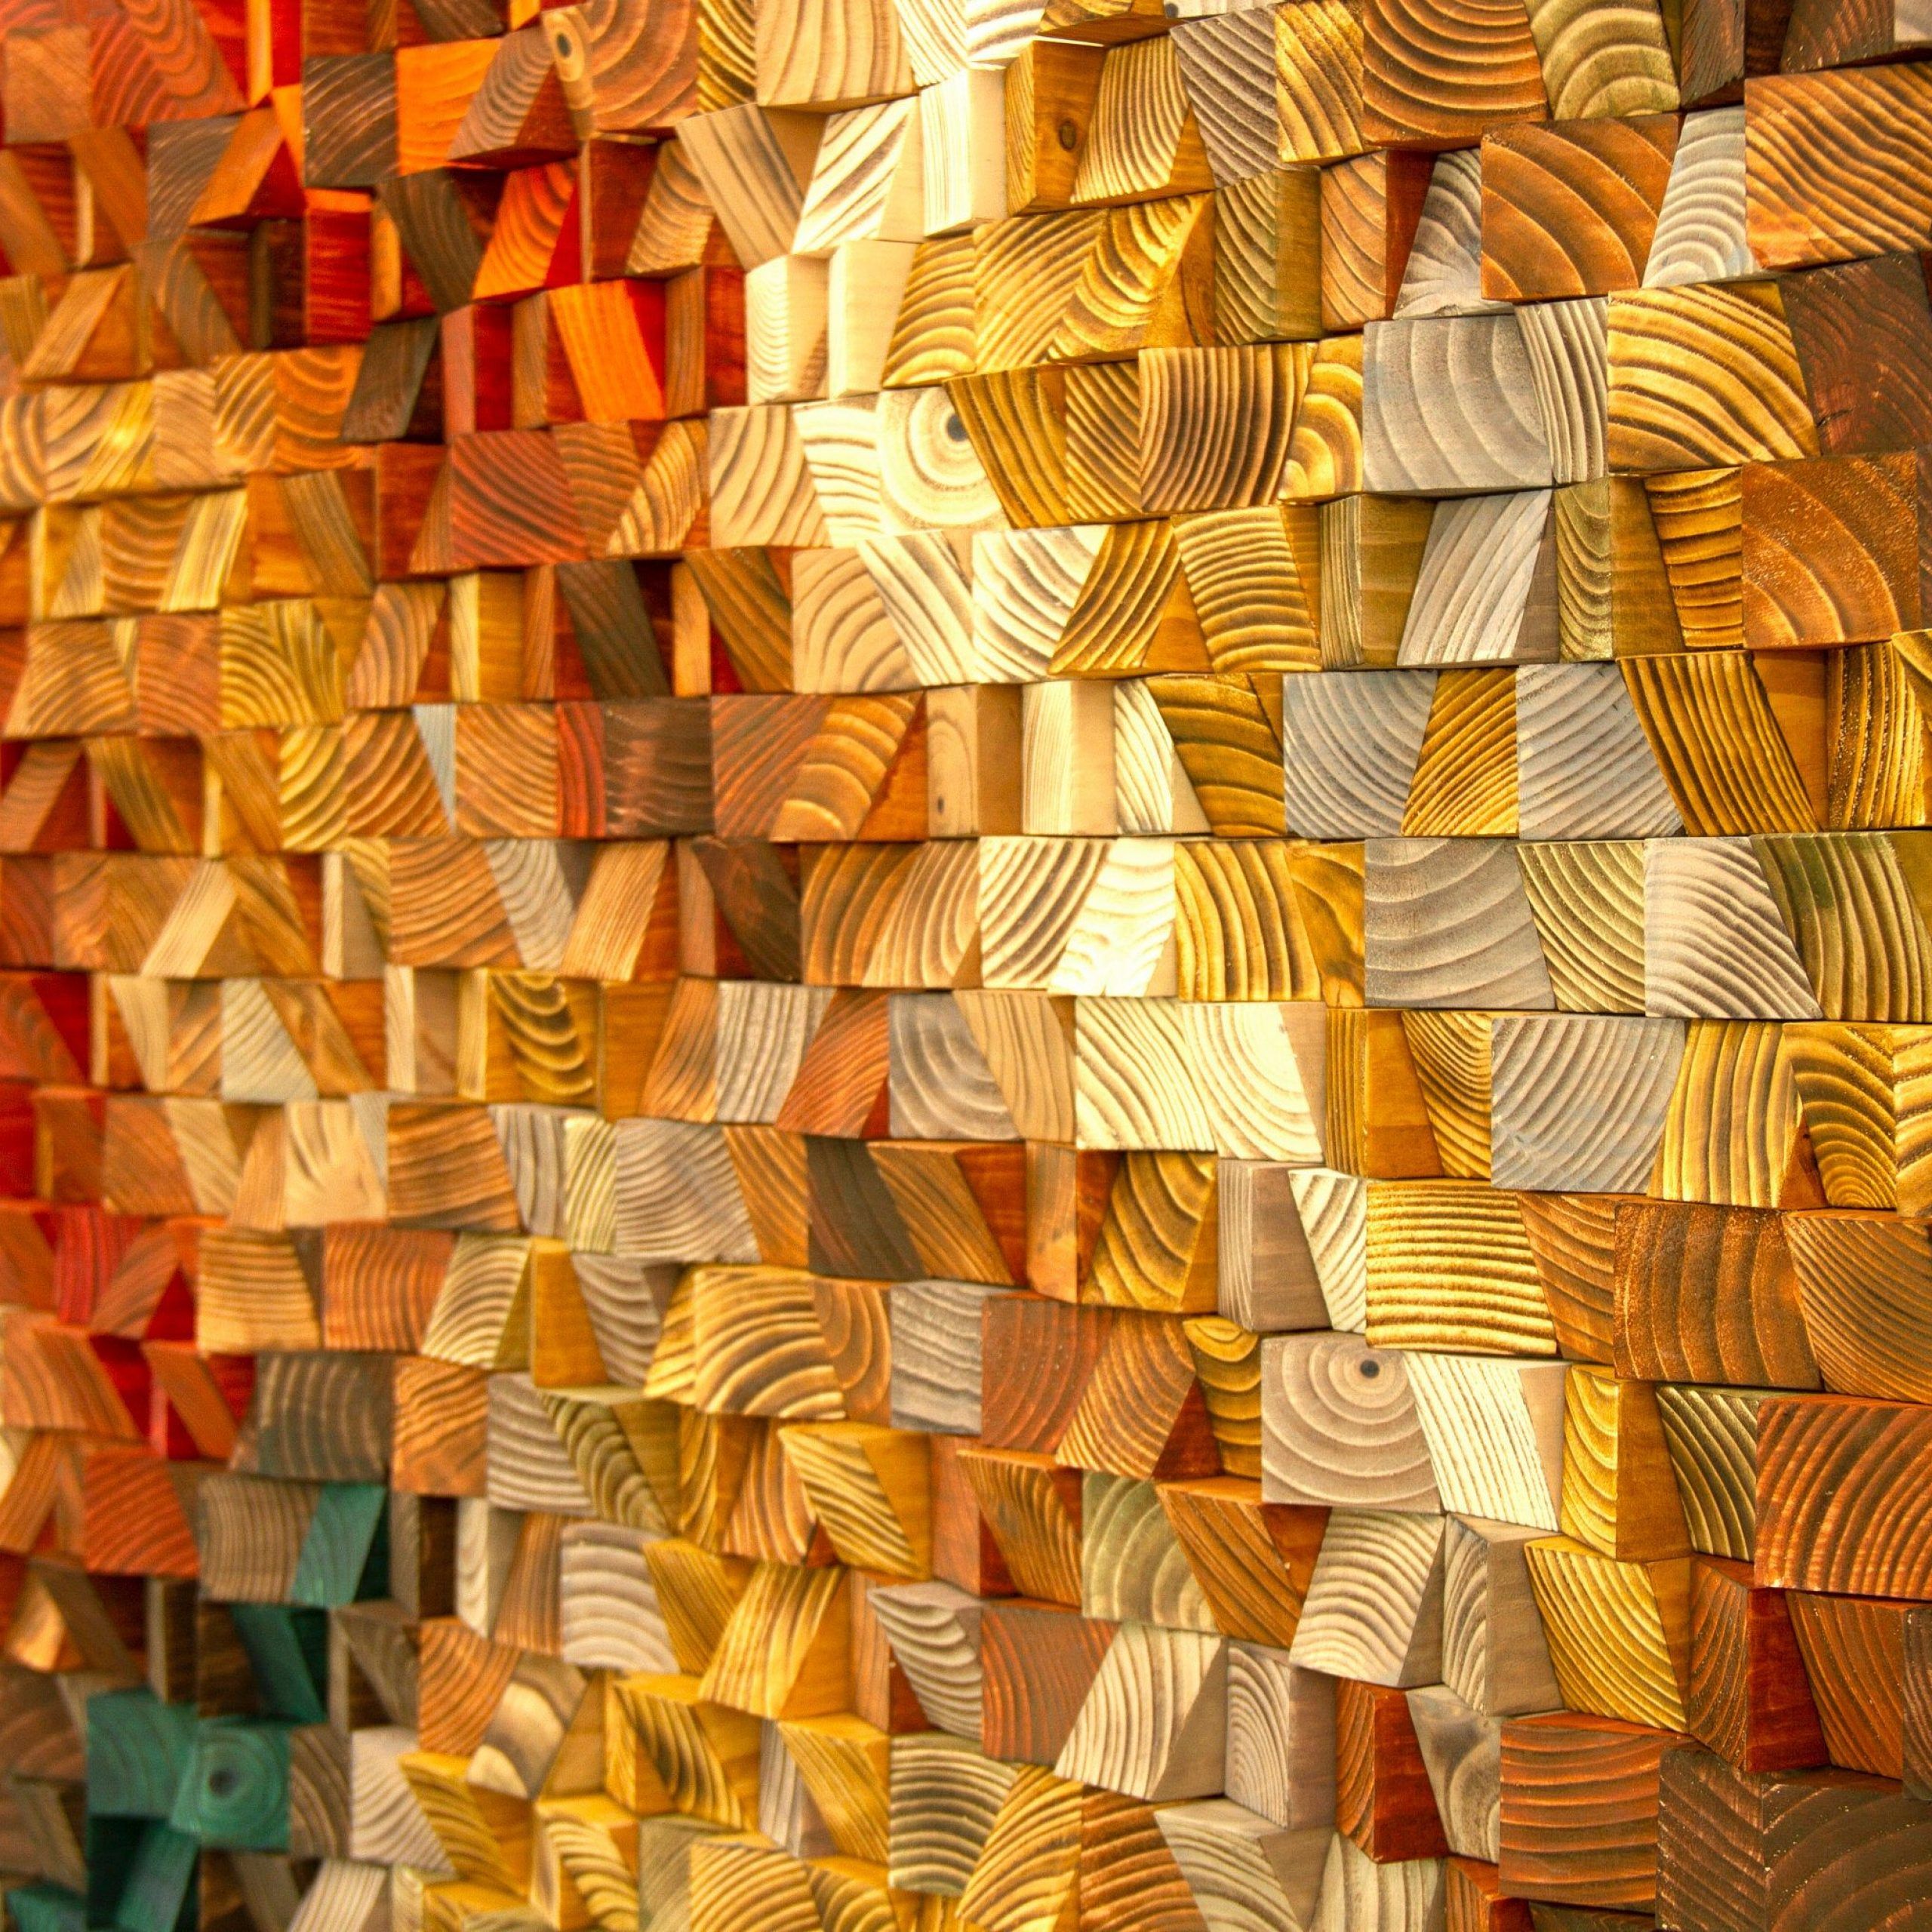 Most Recent Pin On Acoustic Panel Pertaining To Abstract Wood Wall Art (View 2 of 20)